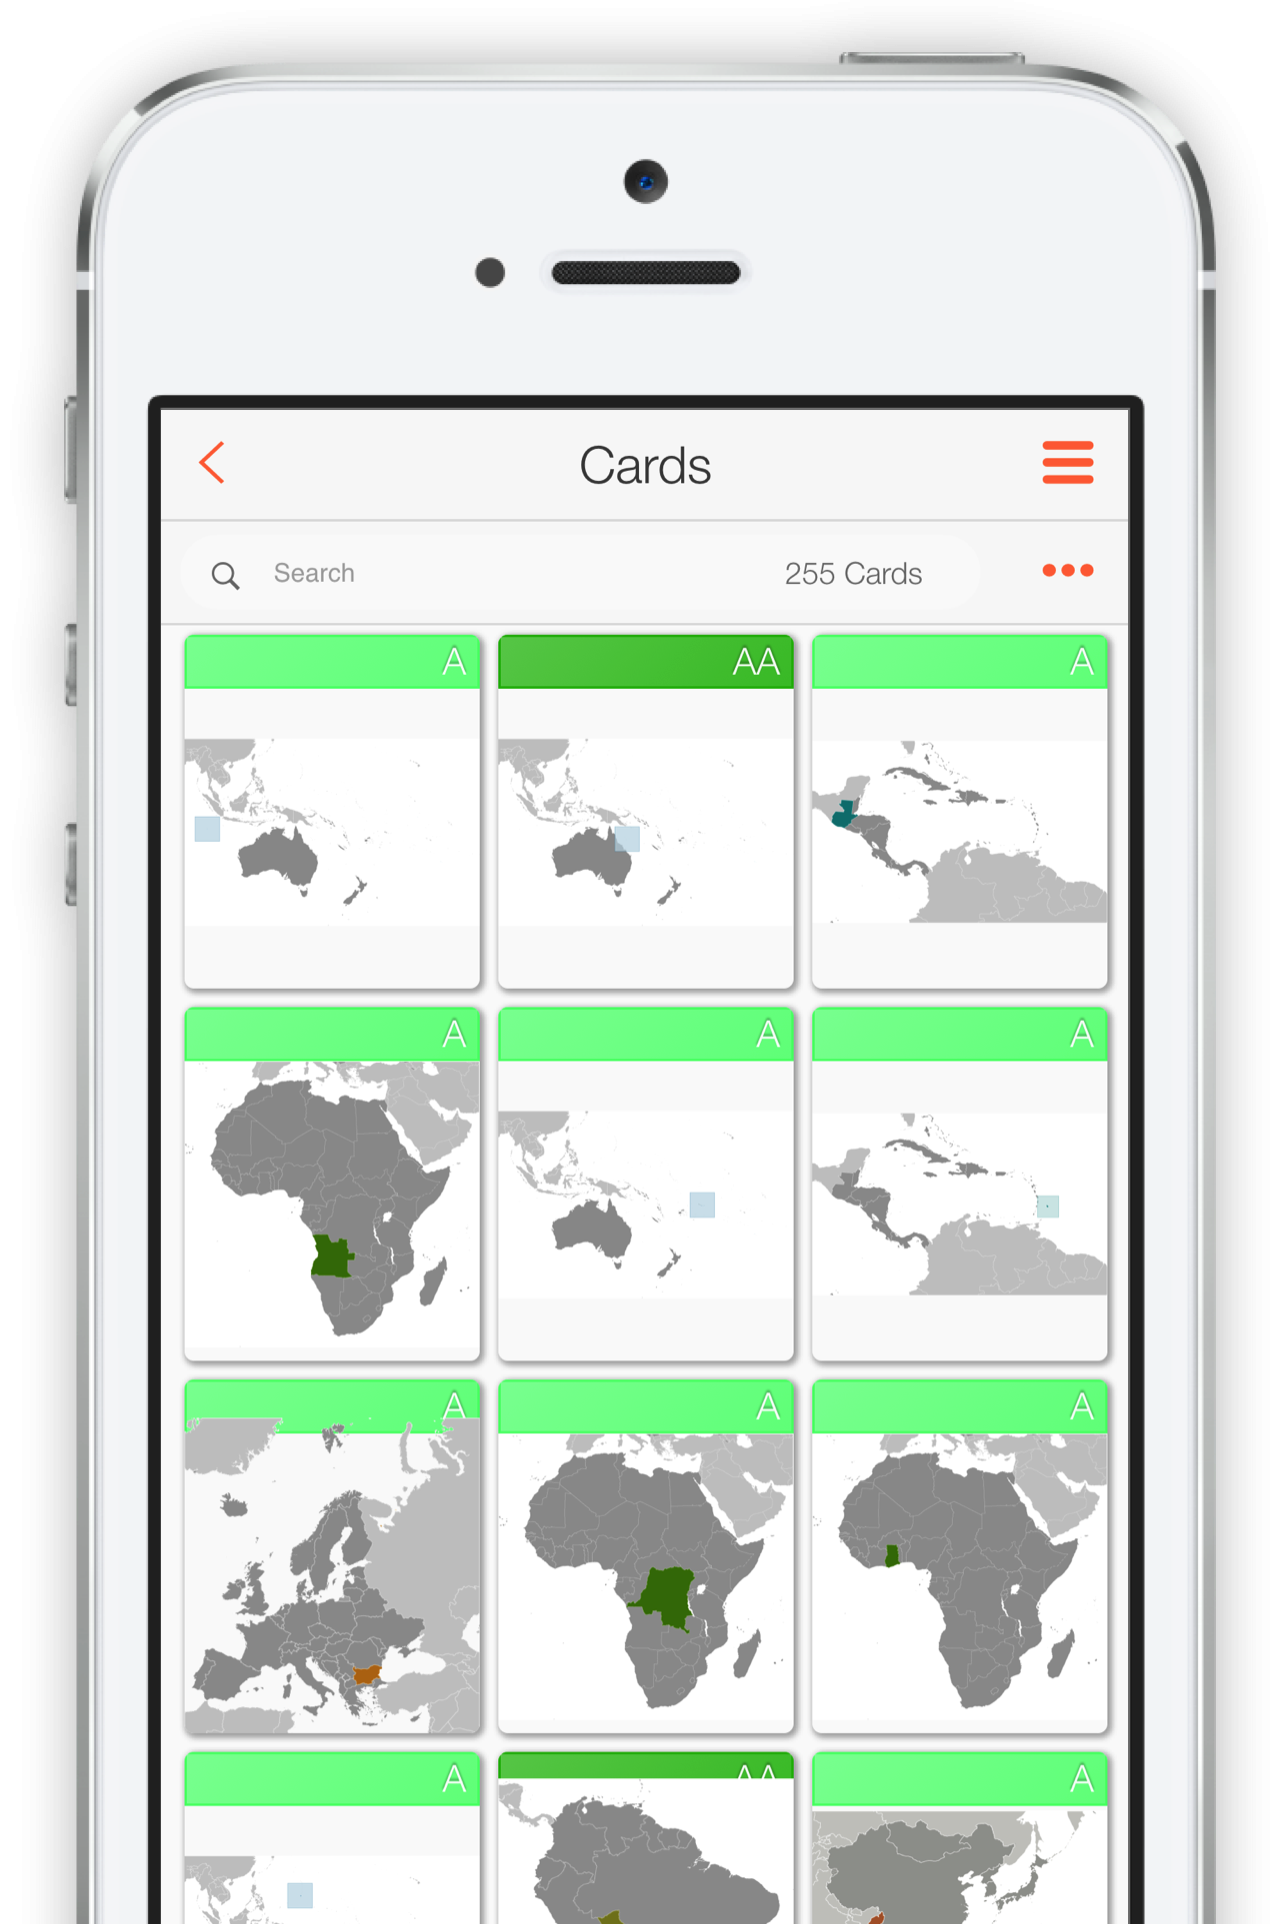 Ankiapp - The Best Flashcard App To Learn Languages And More.